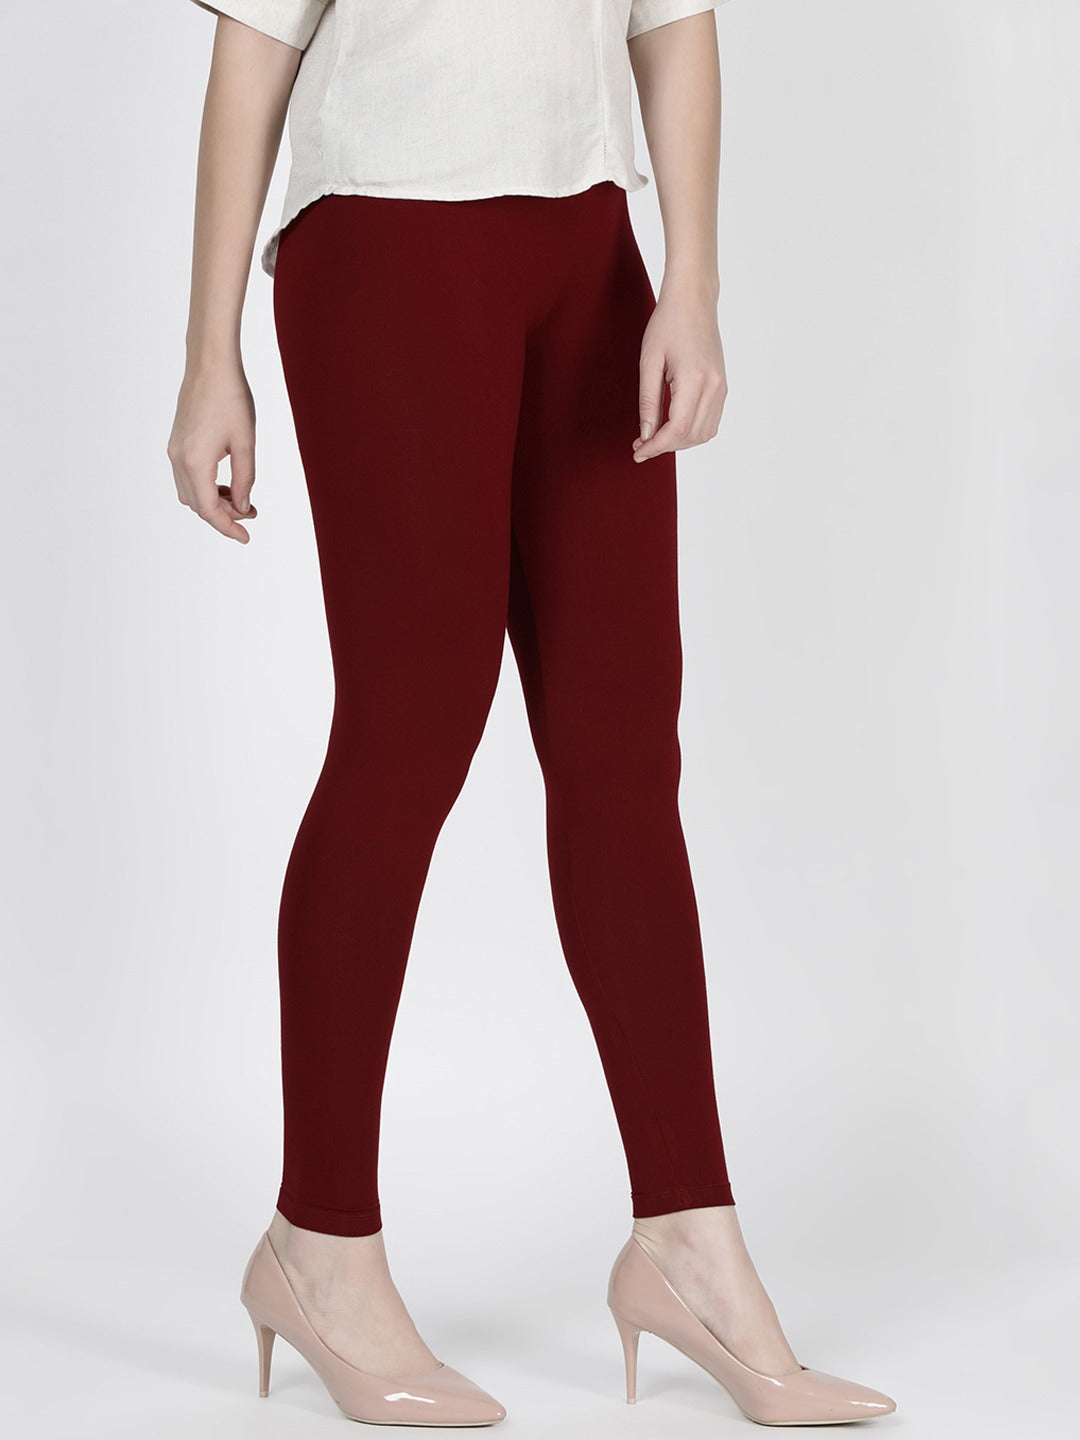 Solid Cherry Leggings - Indian Clothing in Denver, CO, Aurora, CO, Boulder, CO, Fort Collins, CO, Colorado Springs, CO, Parker, CO, Highlands Ranch, CO, Cherry Creek, CO, Centennial, CO, and Longmont, CO. Nationwide shipping USA - India Fashion X